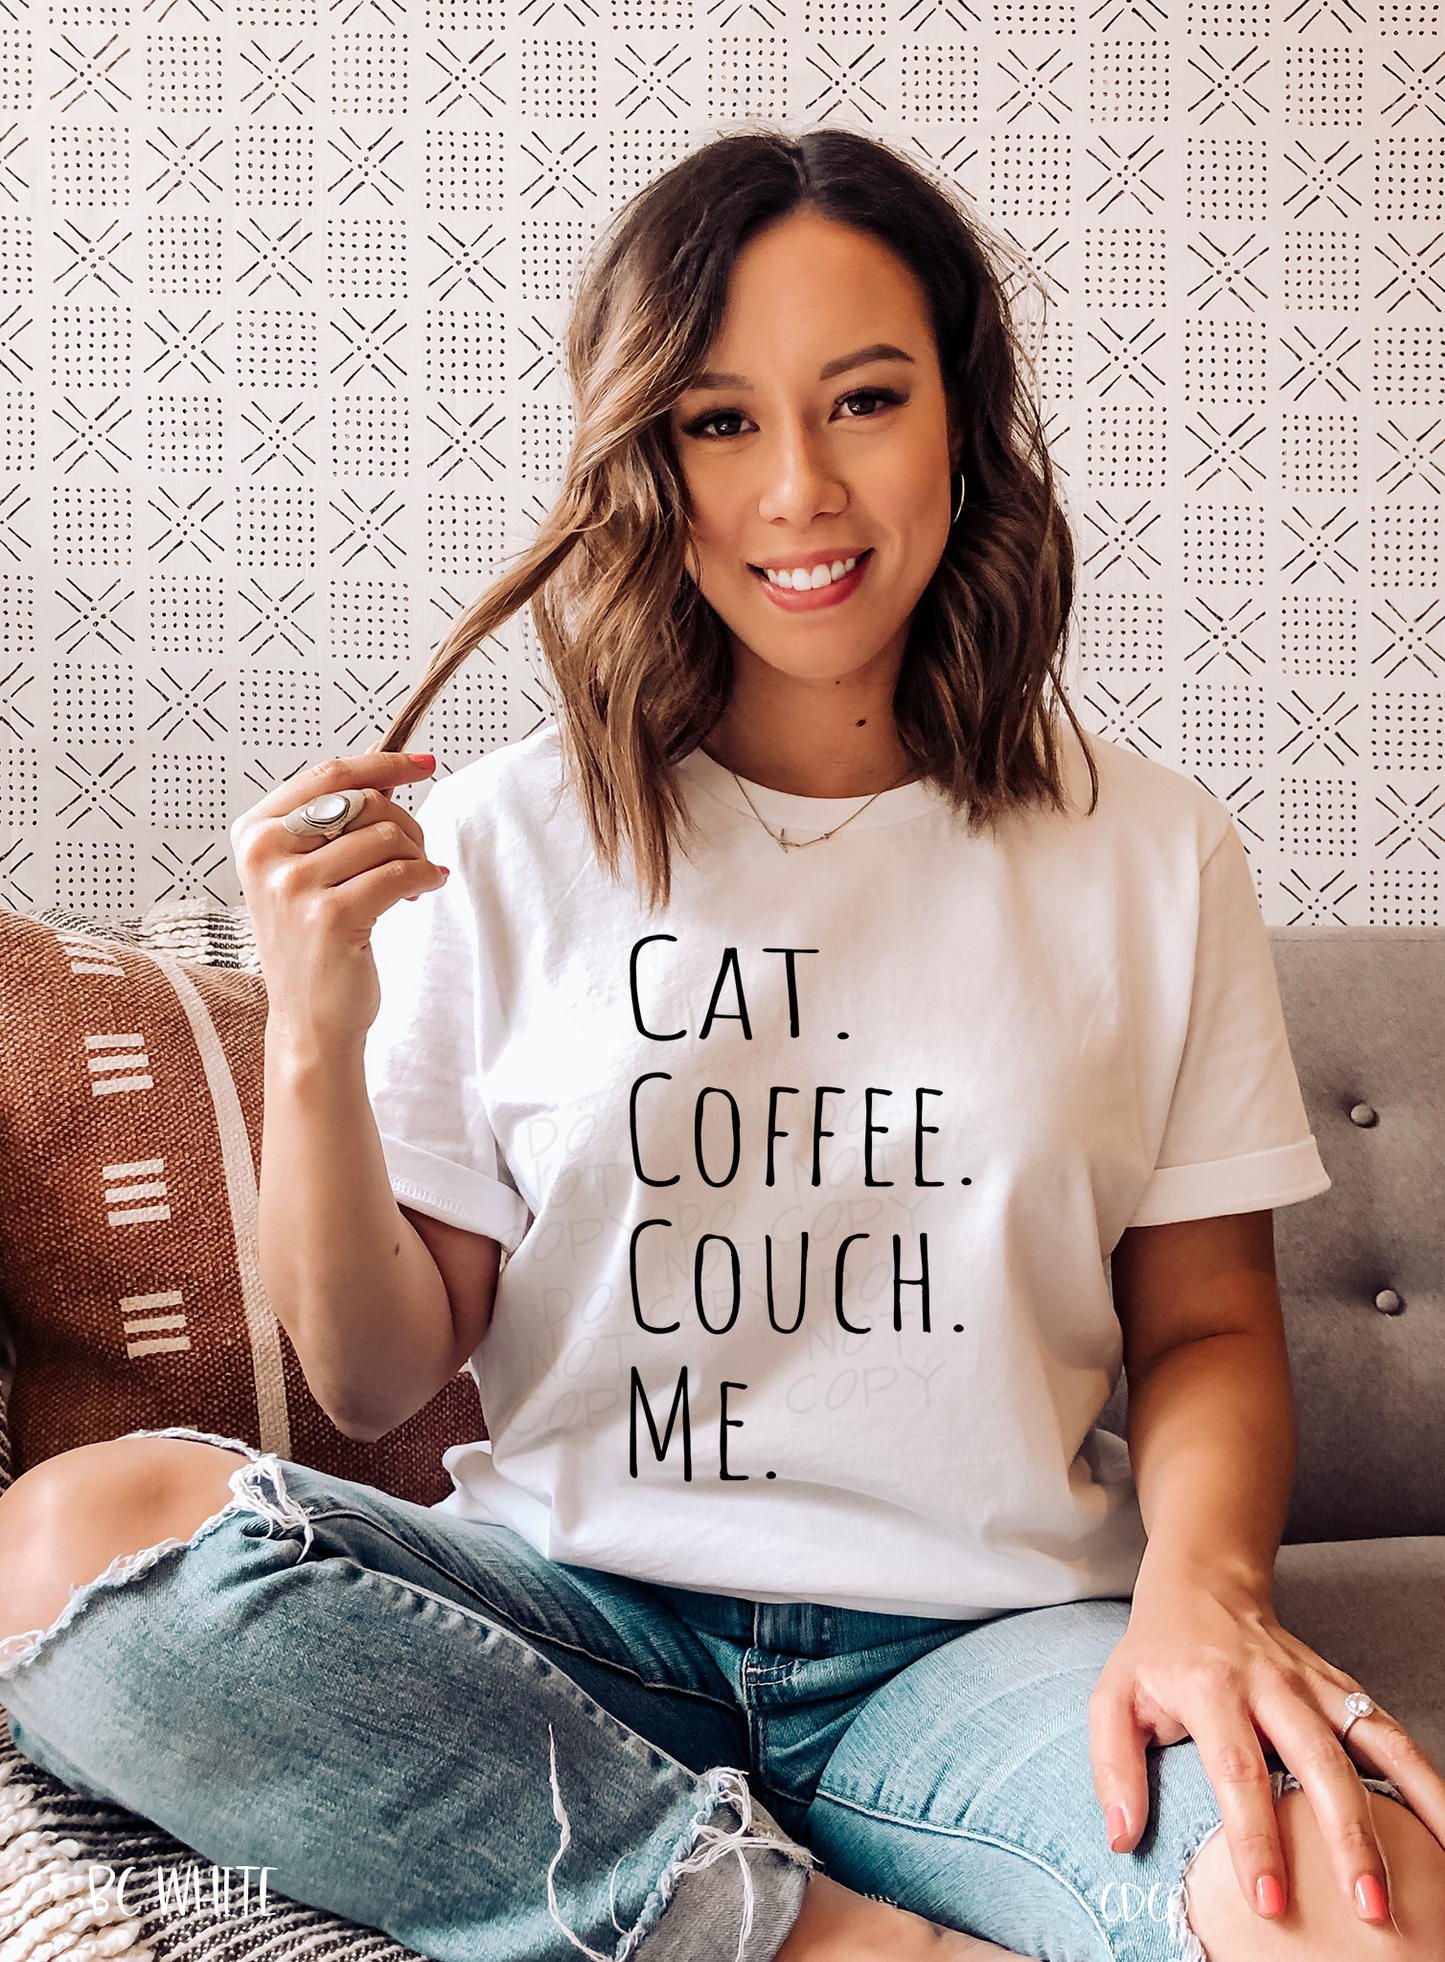 Cat.  Coffee.  Couch.  Me. (325°)